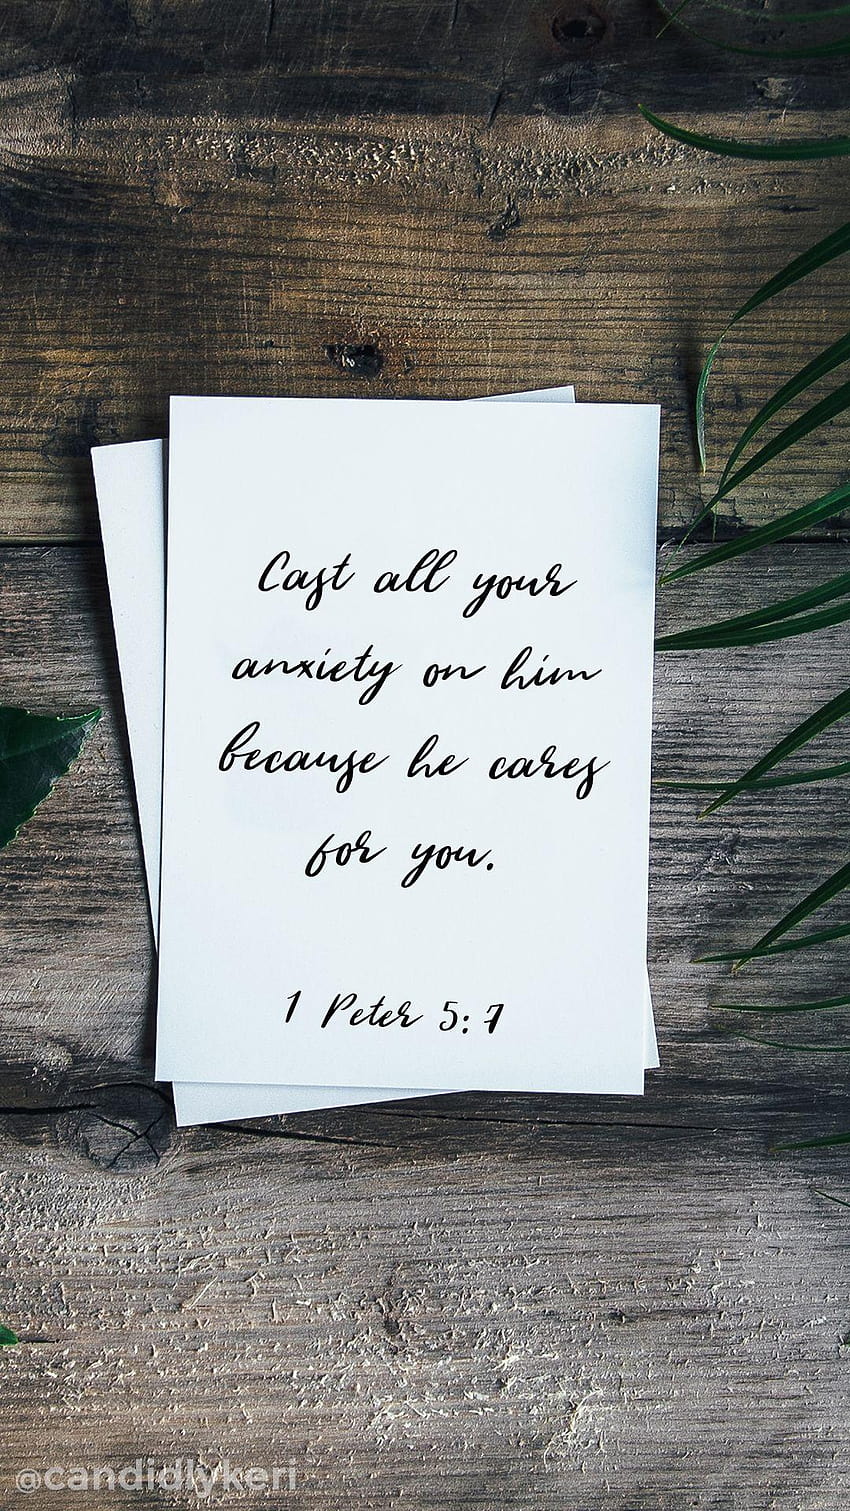 Cast all your anxiety on him because he cares for you 1 Peter 5:7 HD phone wallpaper